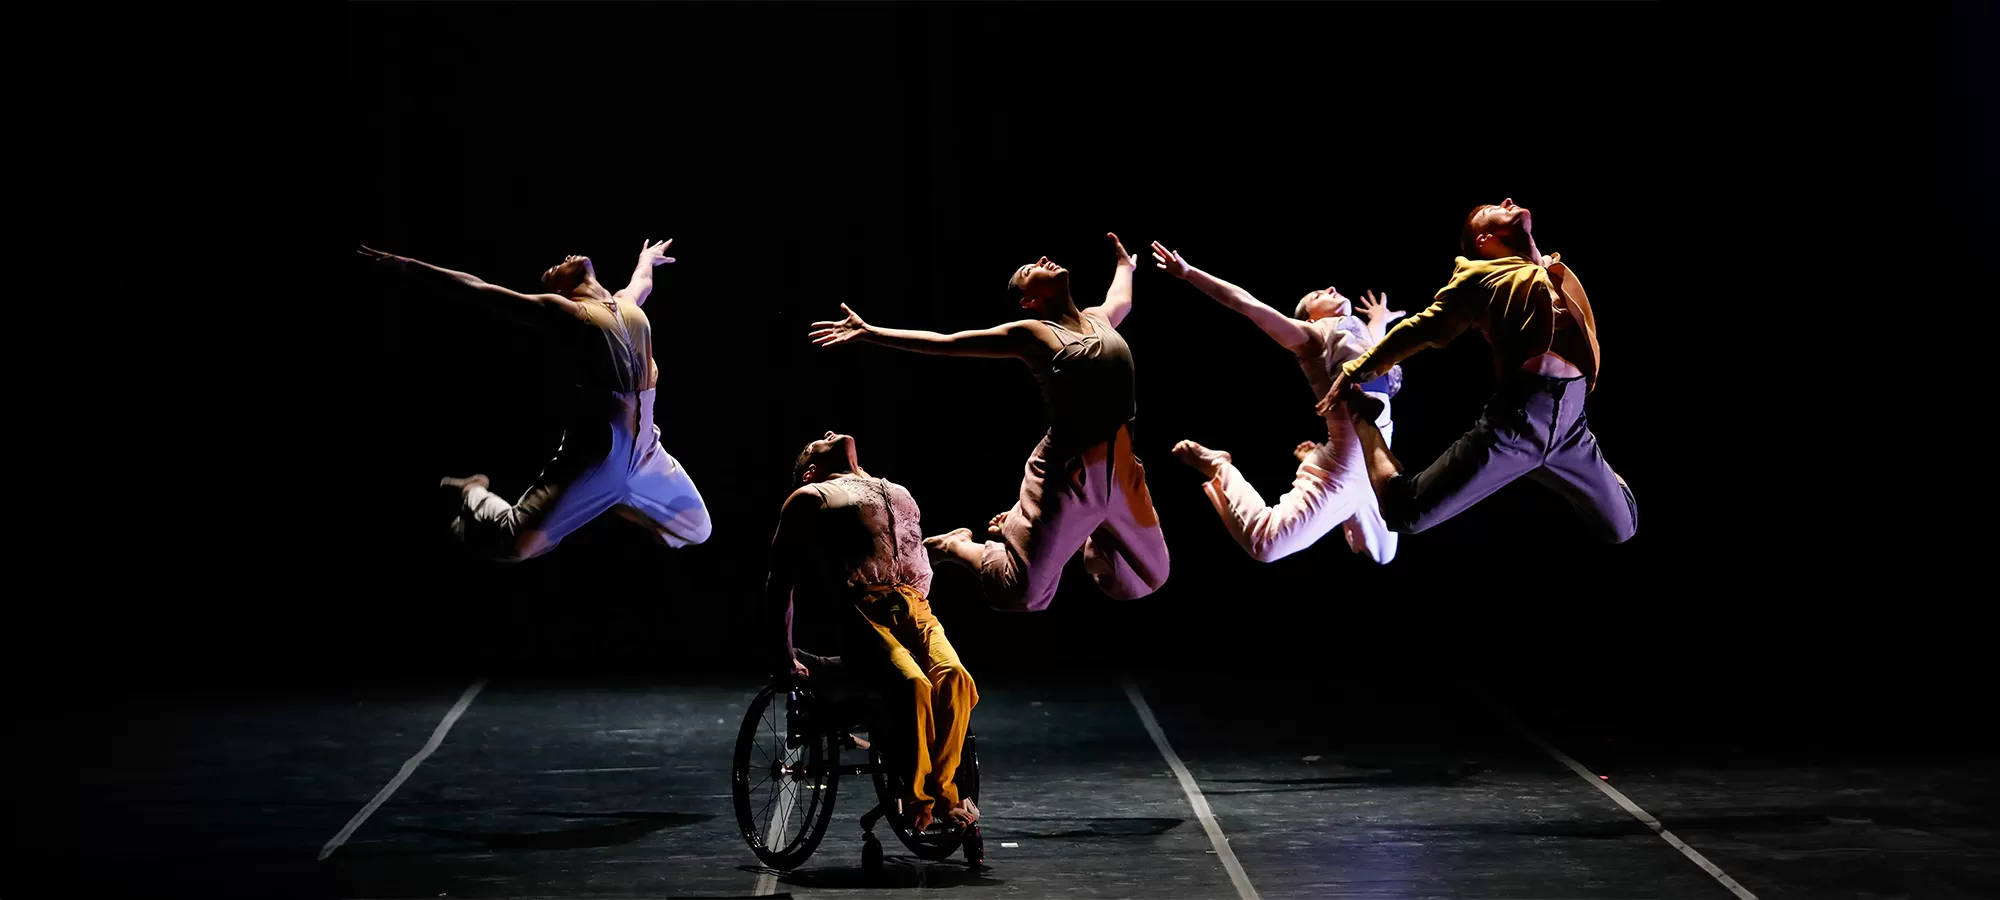 Five disabled and non-disabled dancers lift their bodies skyward, their solar plexuses rising up and out. One dancer pushes themselves out of their wheelchair with their hands, four dancers l